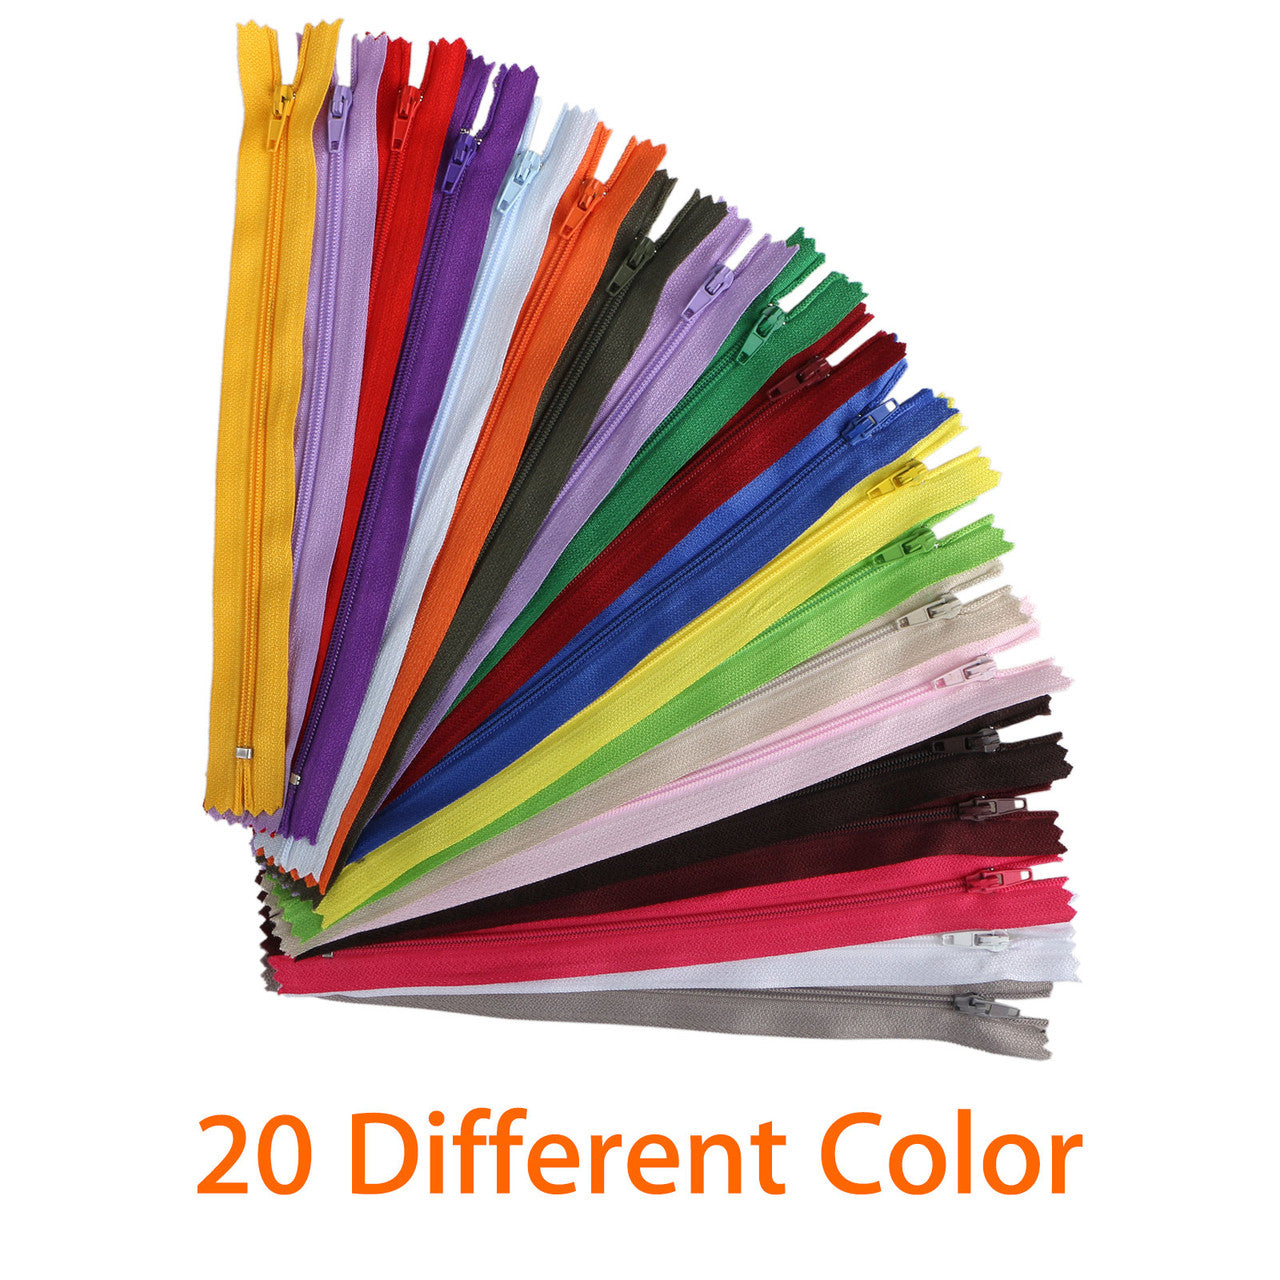 Colored Nylon Coil Zipper Tailor Sewer Craft 20cm Crafter's DIY 20 Colors for Sewing, Handbag, Purse Making, Clothing, Wholesale Pack, 100Pcs